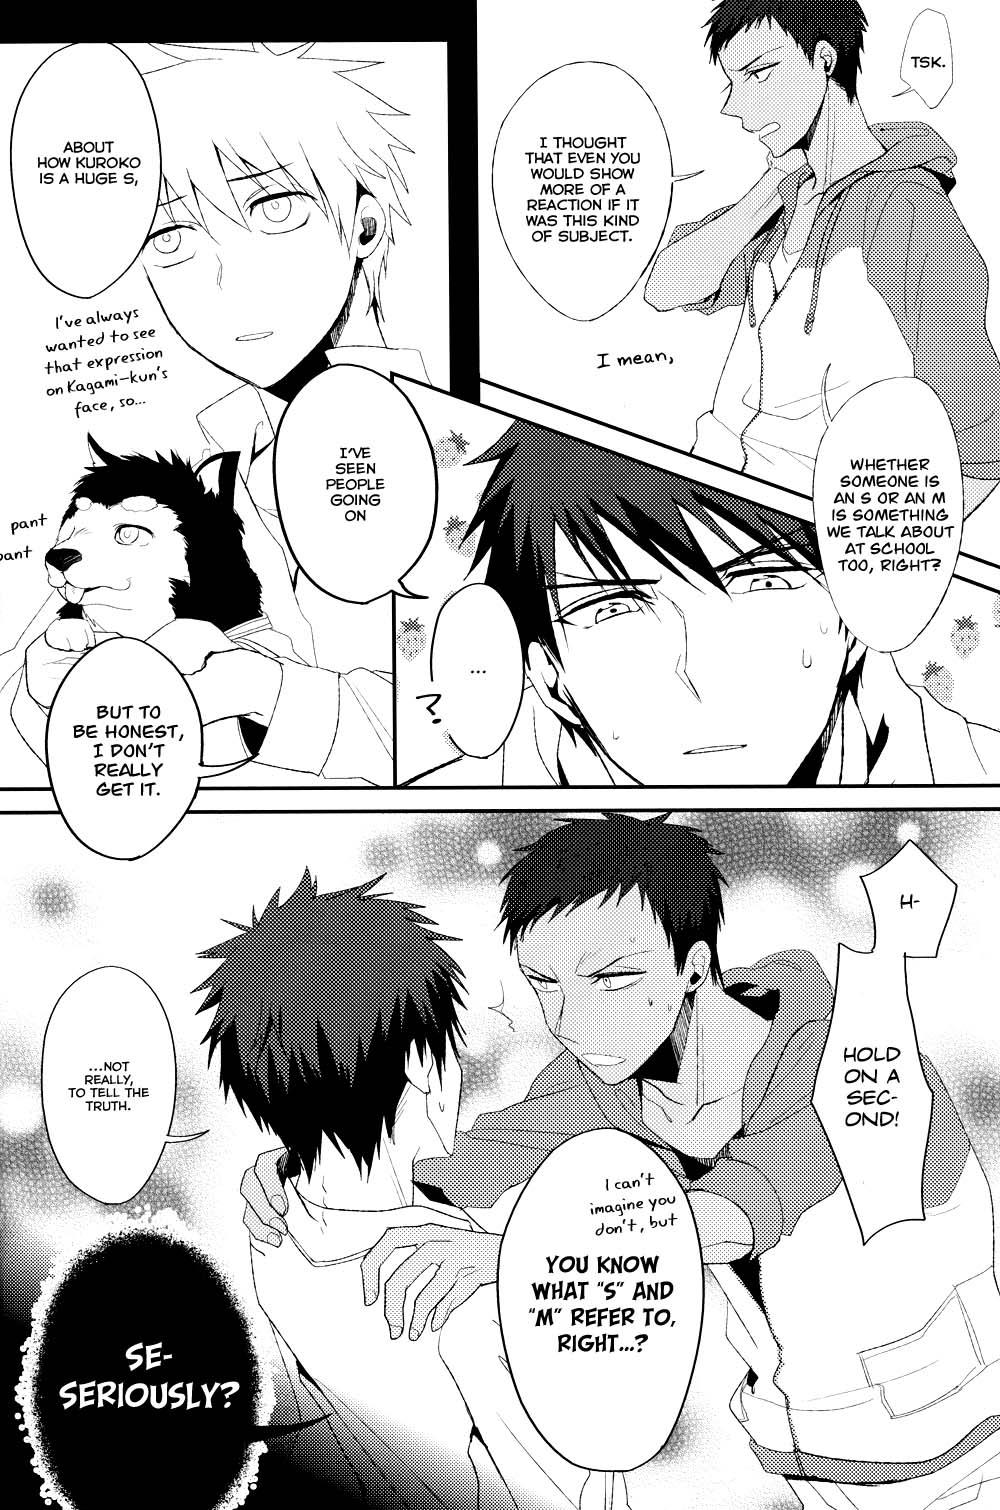 Africa Dont you have an aptitude for this? - Kuroko no basuke Gay Solo - Page 3